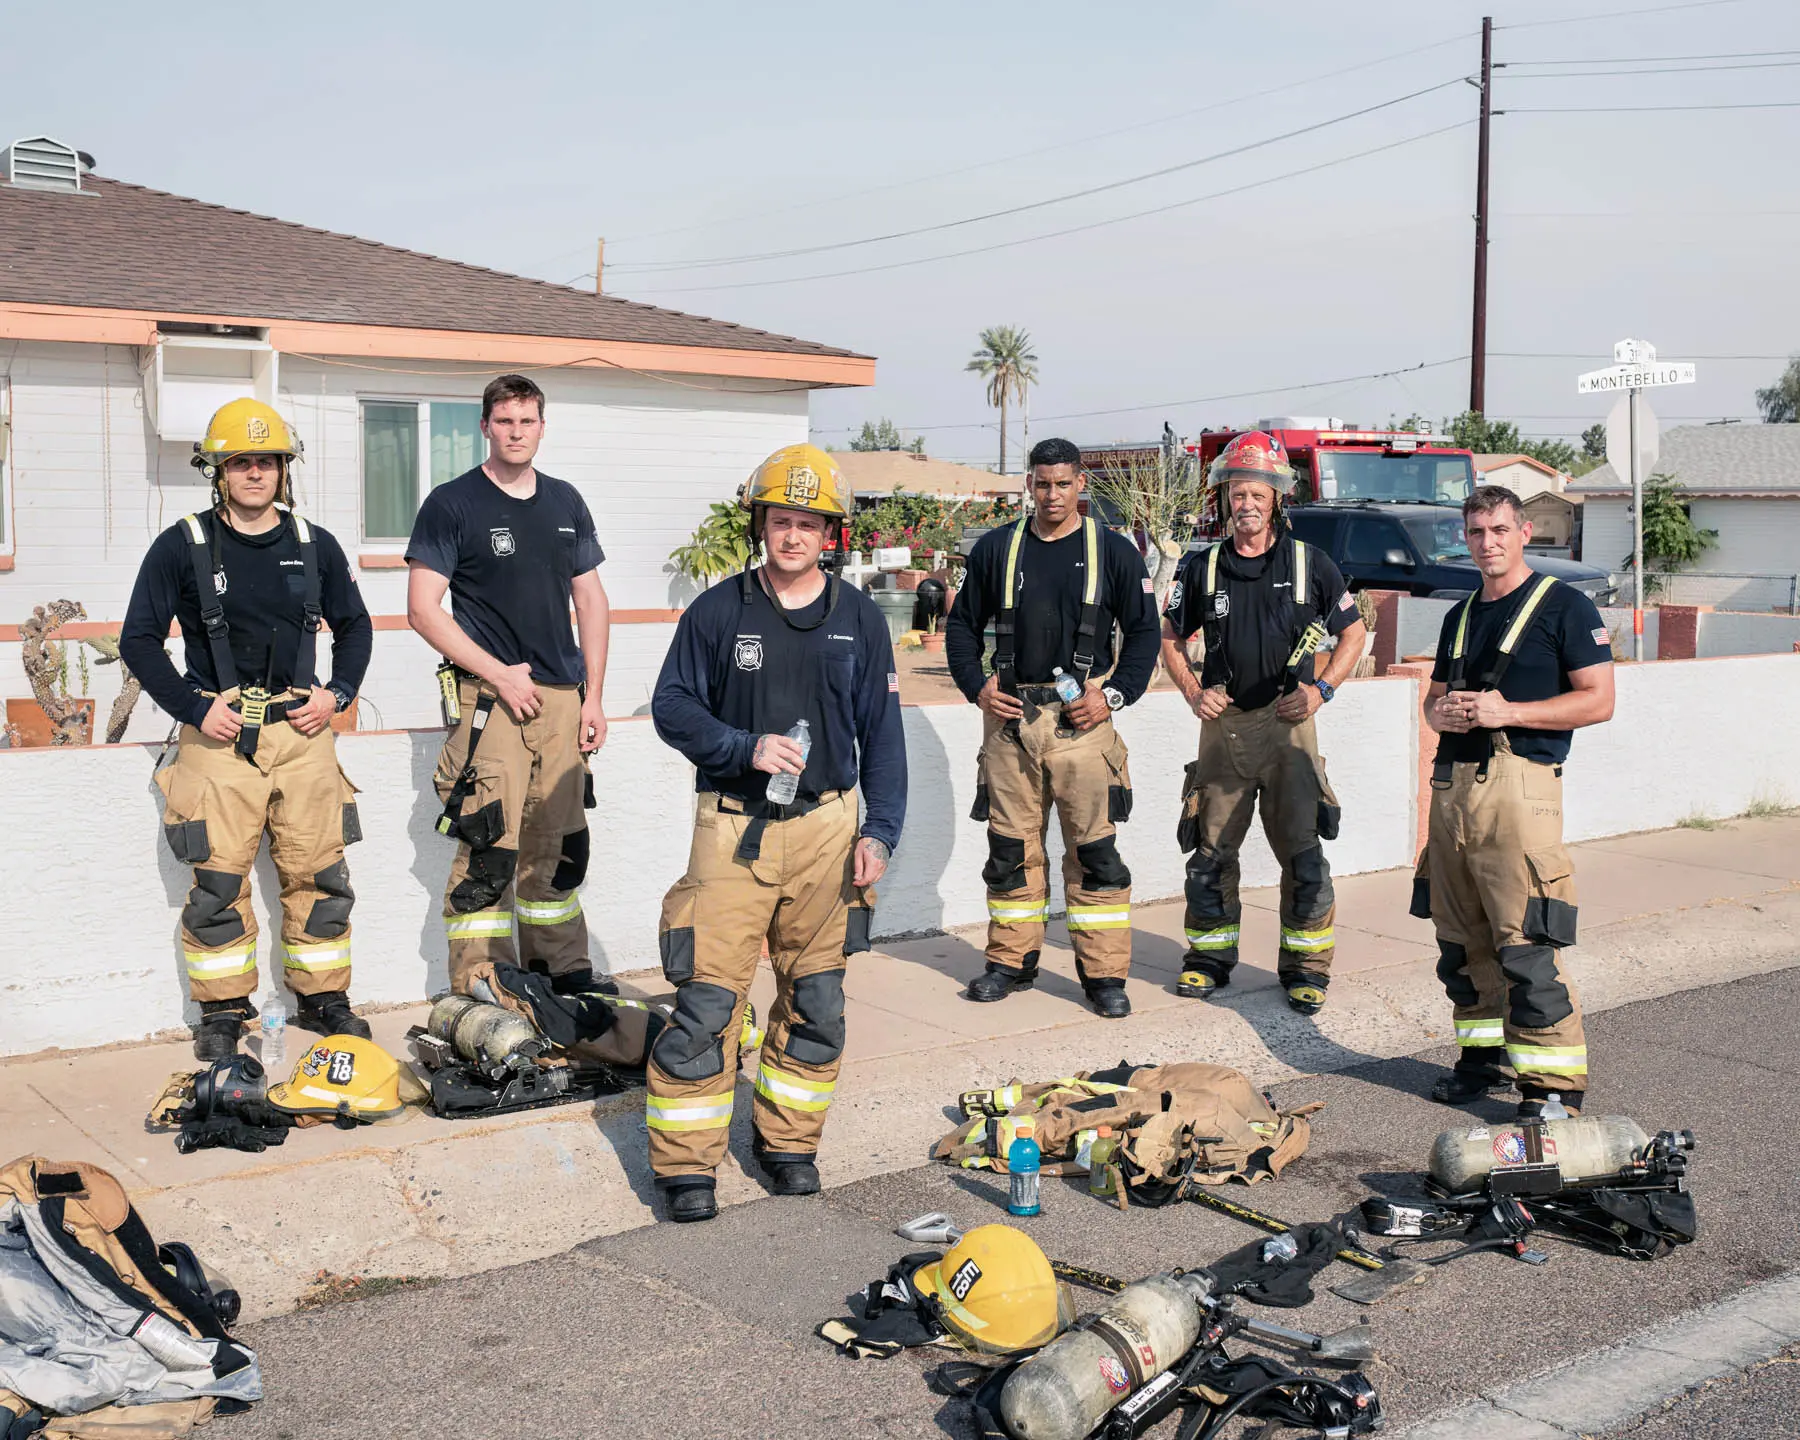 firefighters pose for photo